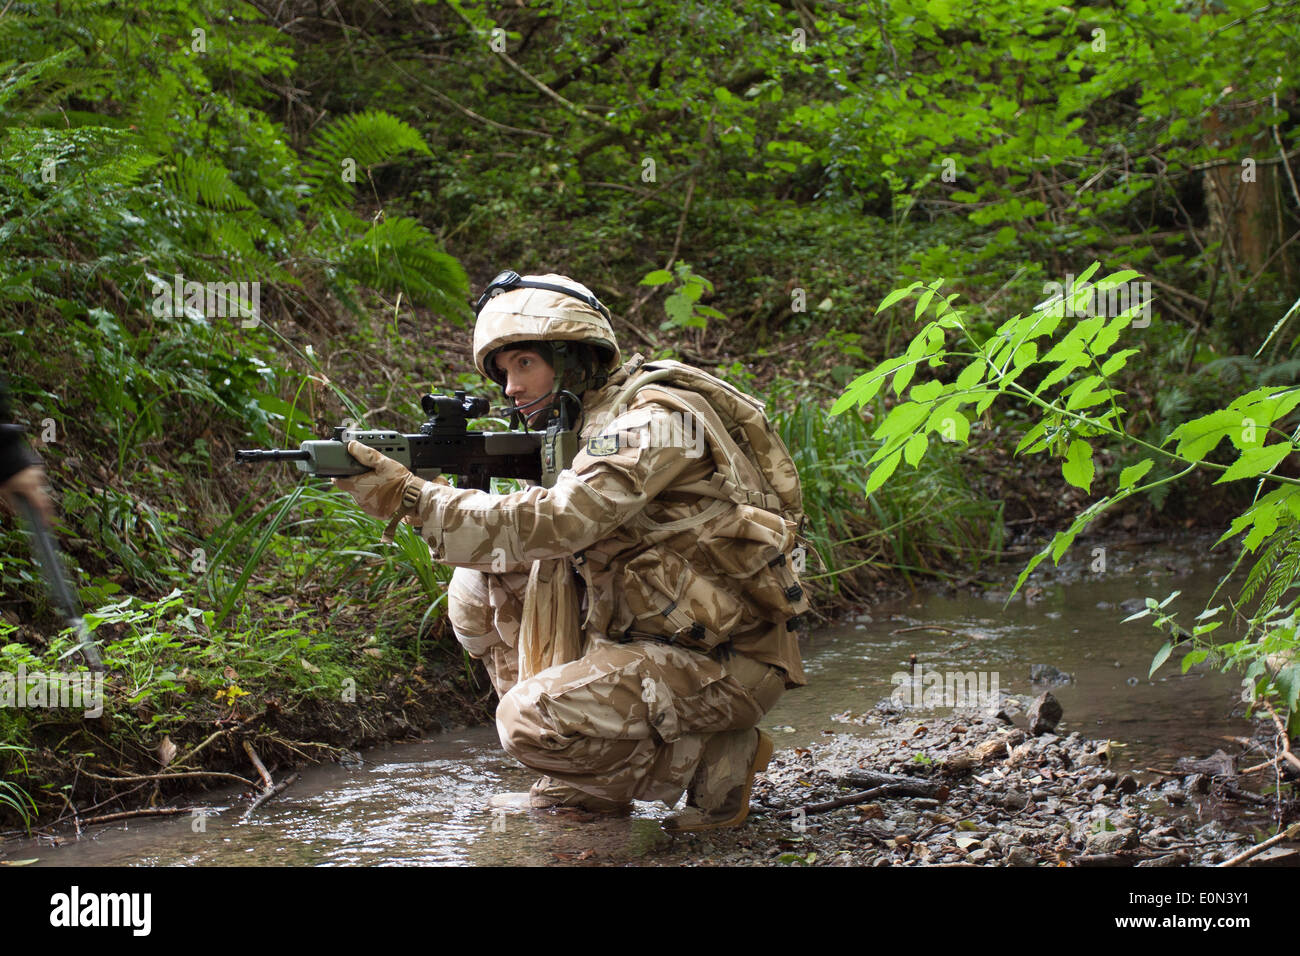 Soldier (actor) in full British Army Uniform Stock Photo